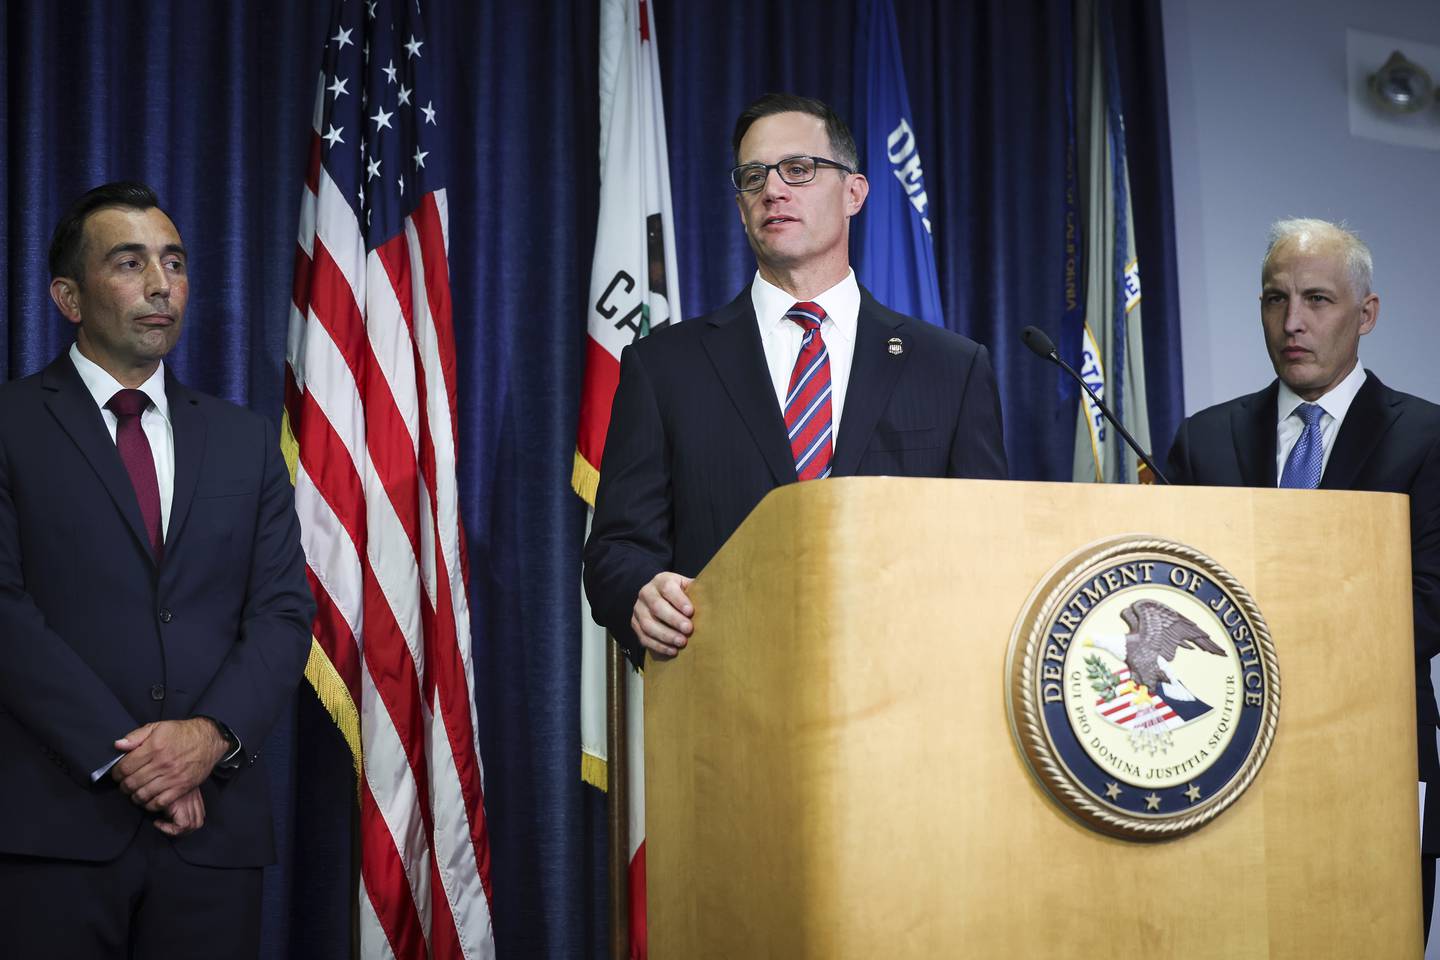 U.S. Attorney Randy S. Grossman for the Southern District of California, center, speaks during a press conference at the U.S. Attorney's Office for the Southern District of California on Thursday, Aug. 3, 2023, in San Diego.